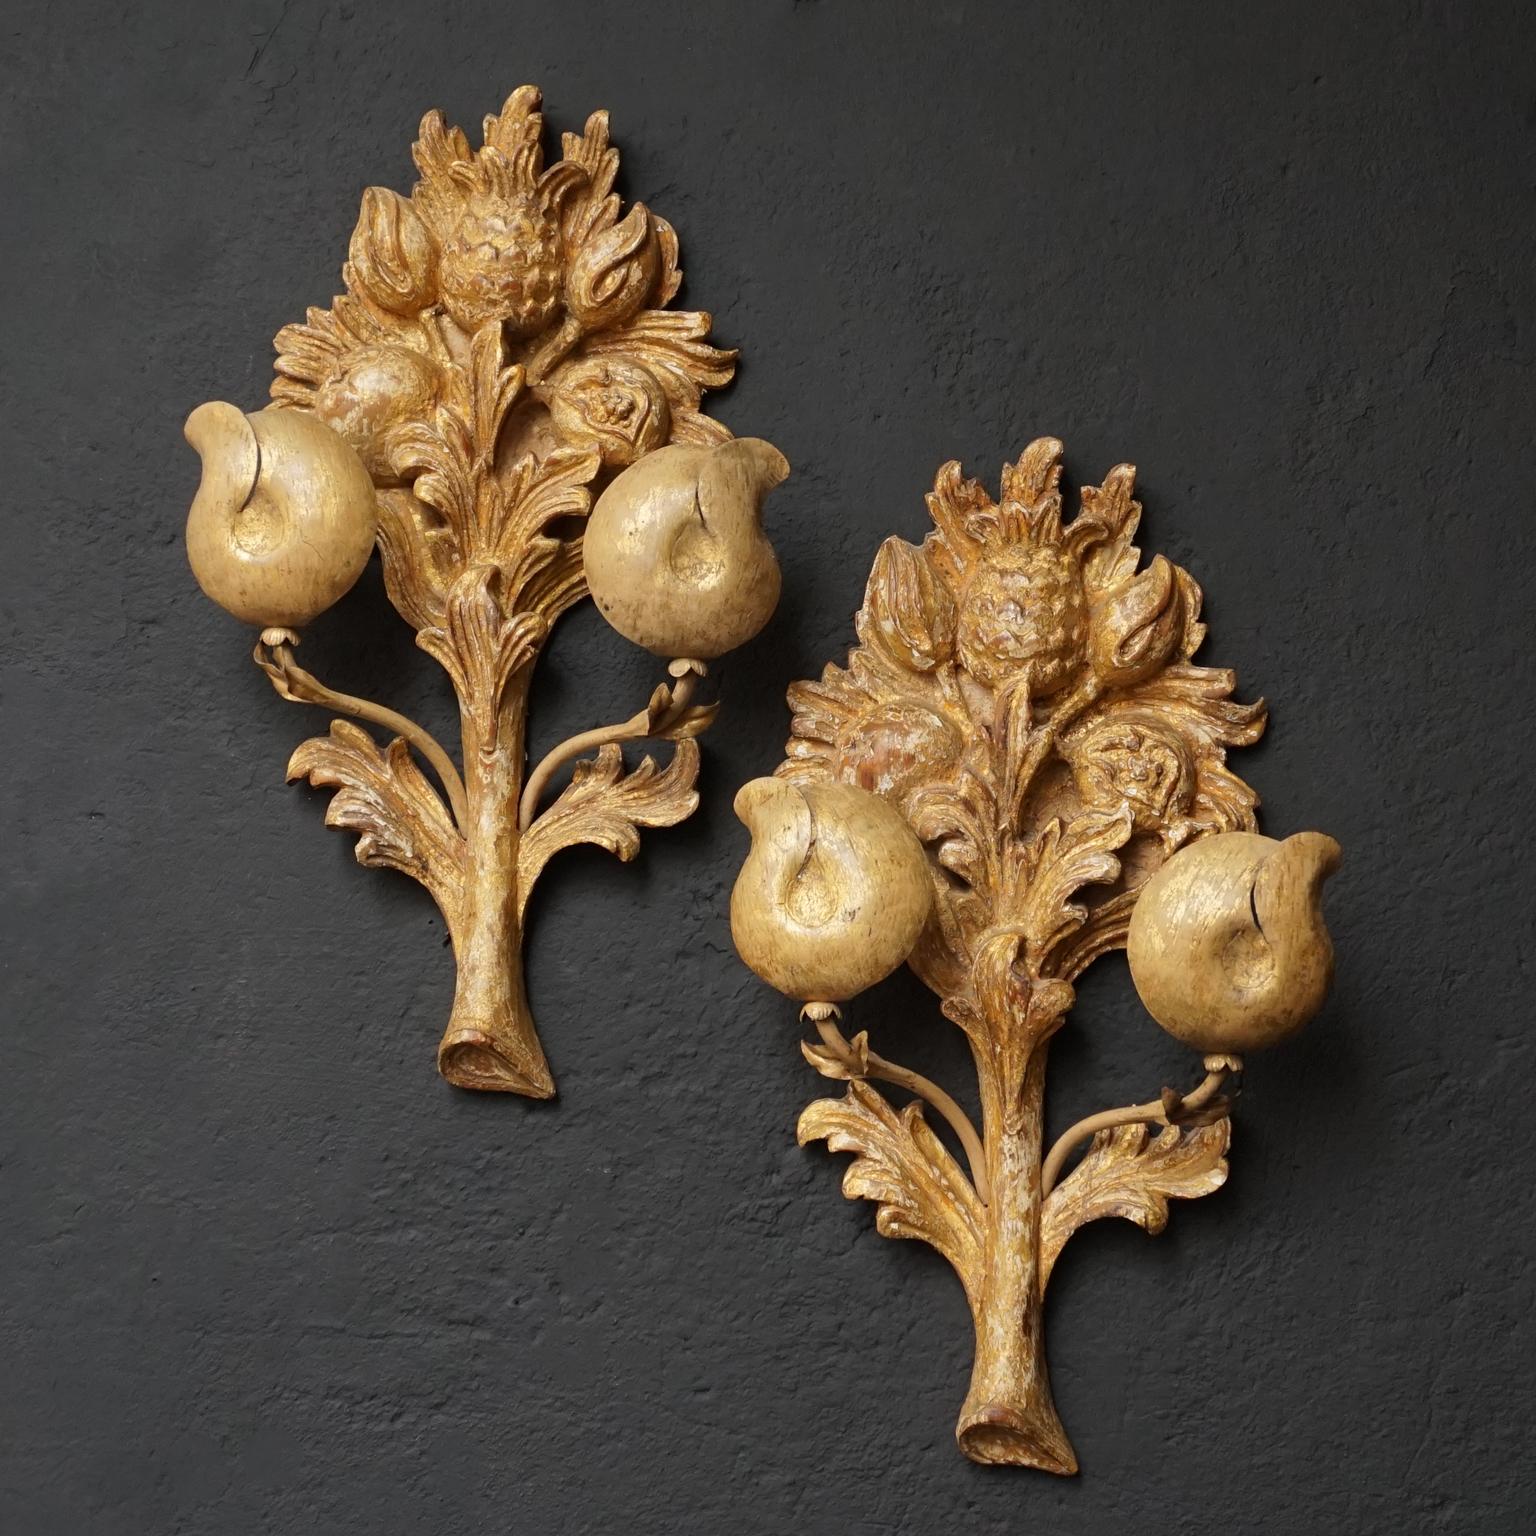 Antique Italian carved gilt wood and gessoed wall sconces or appliques shaped like bouquets with foliage, tulips, thistle, apple and Pomegranate decoration, 19th century.

Wonderfully Italian carved gessoed and gold leafed appliques, each with two